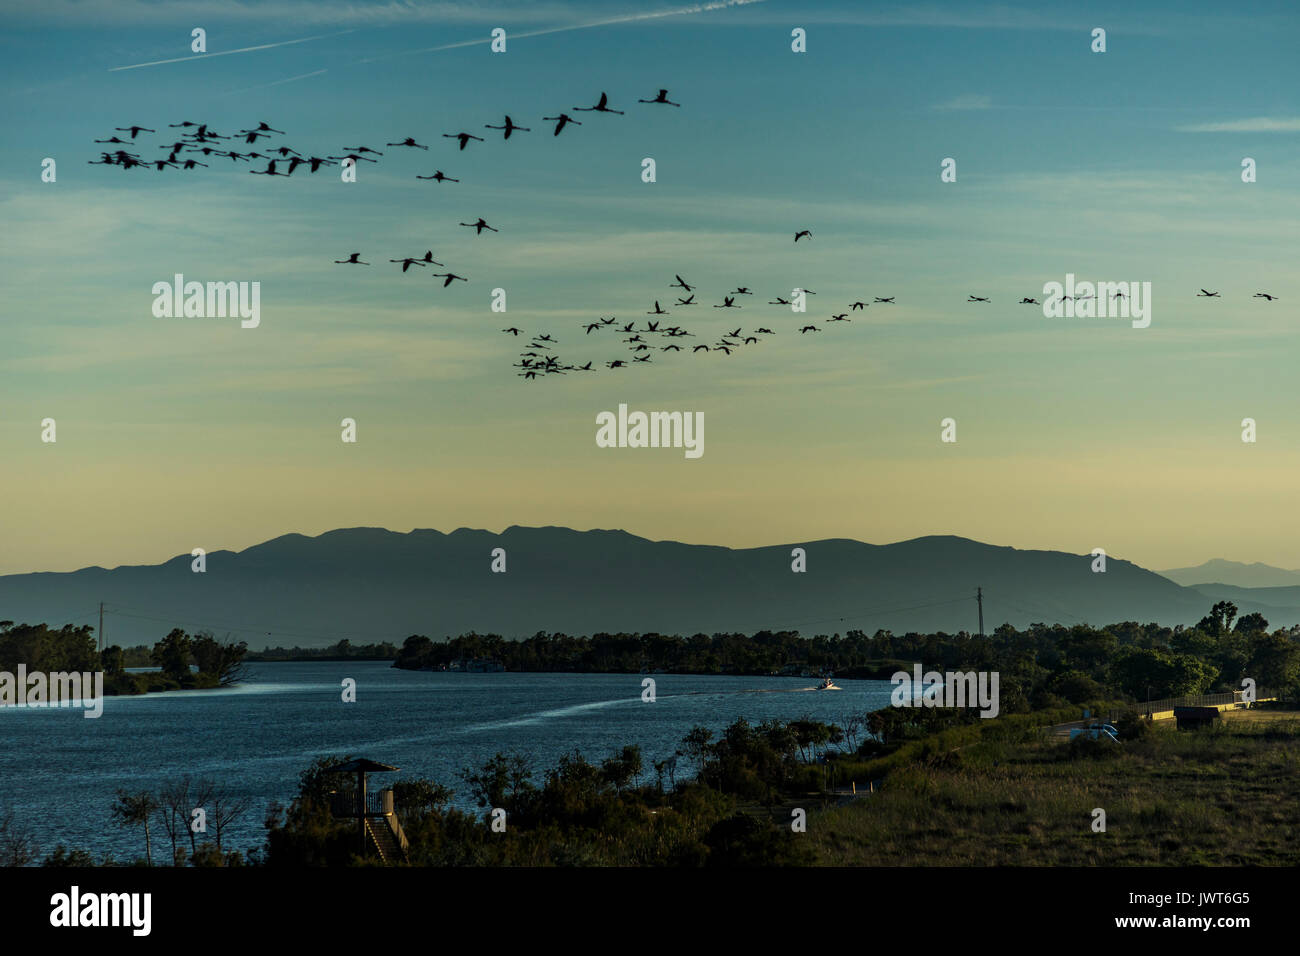 A flock of flamingos at the mouth of the river Ebro. Stock Photo